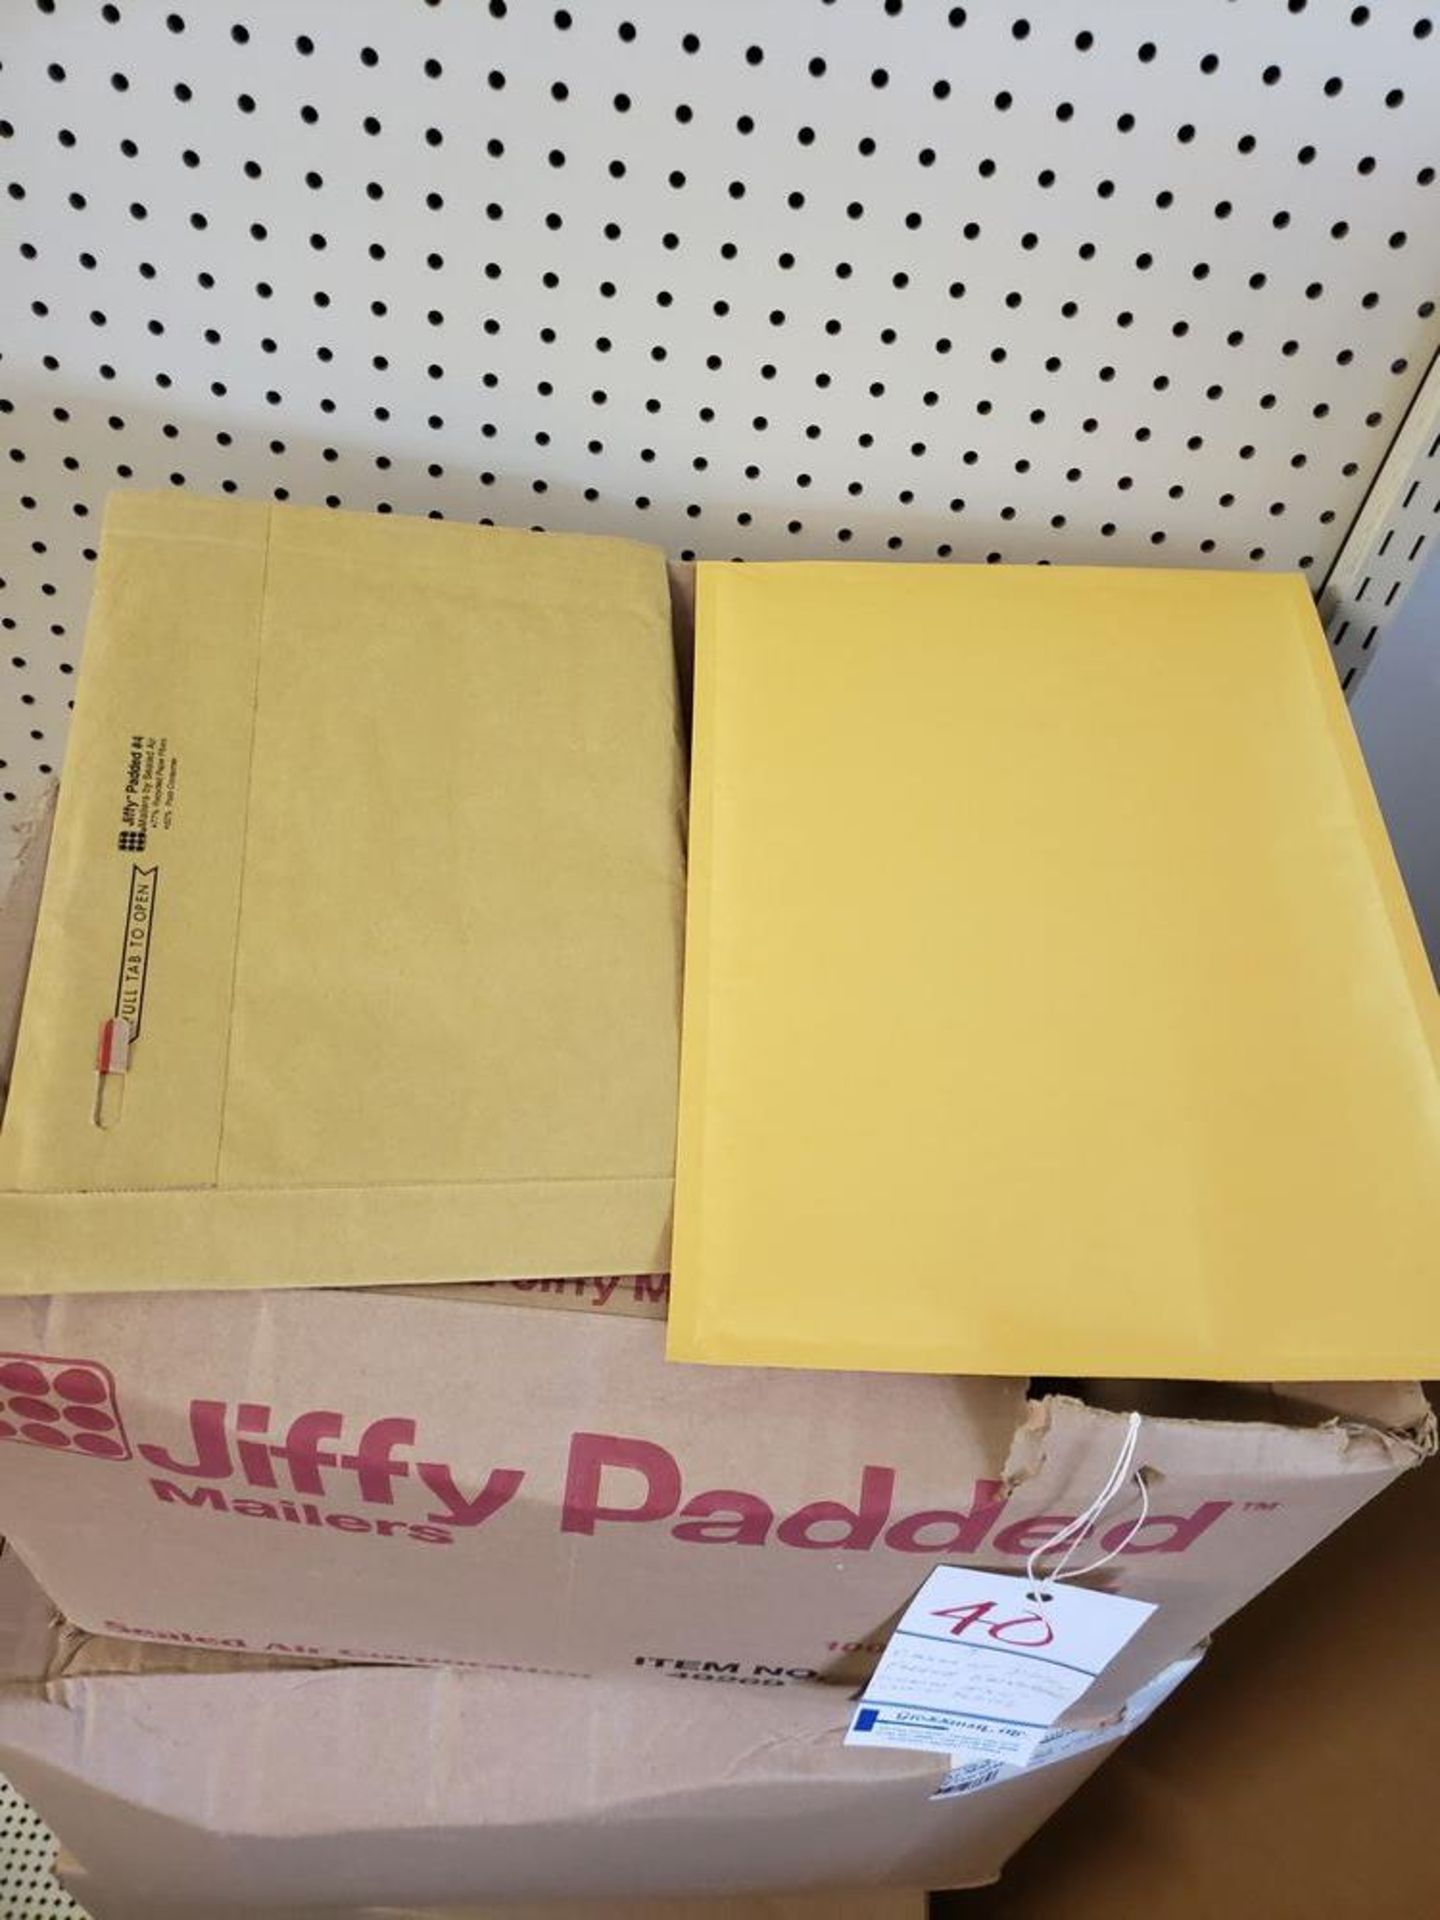 CASES OF JIFFY PADDED ENVELOPES (Note: Your bid is multiplied by the quantity) - Image 2 of 2